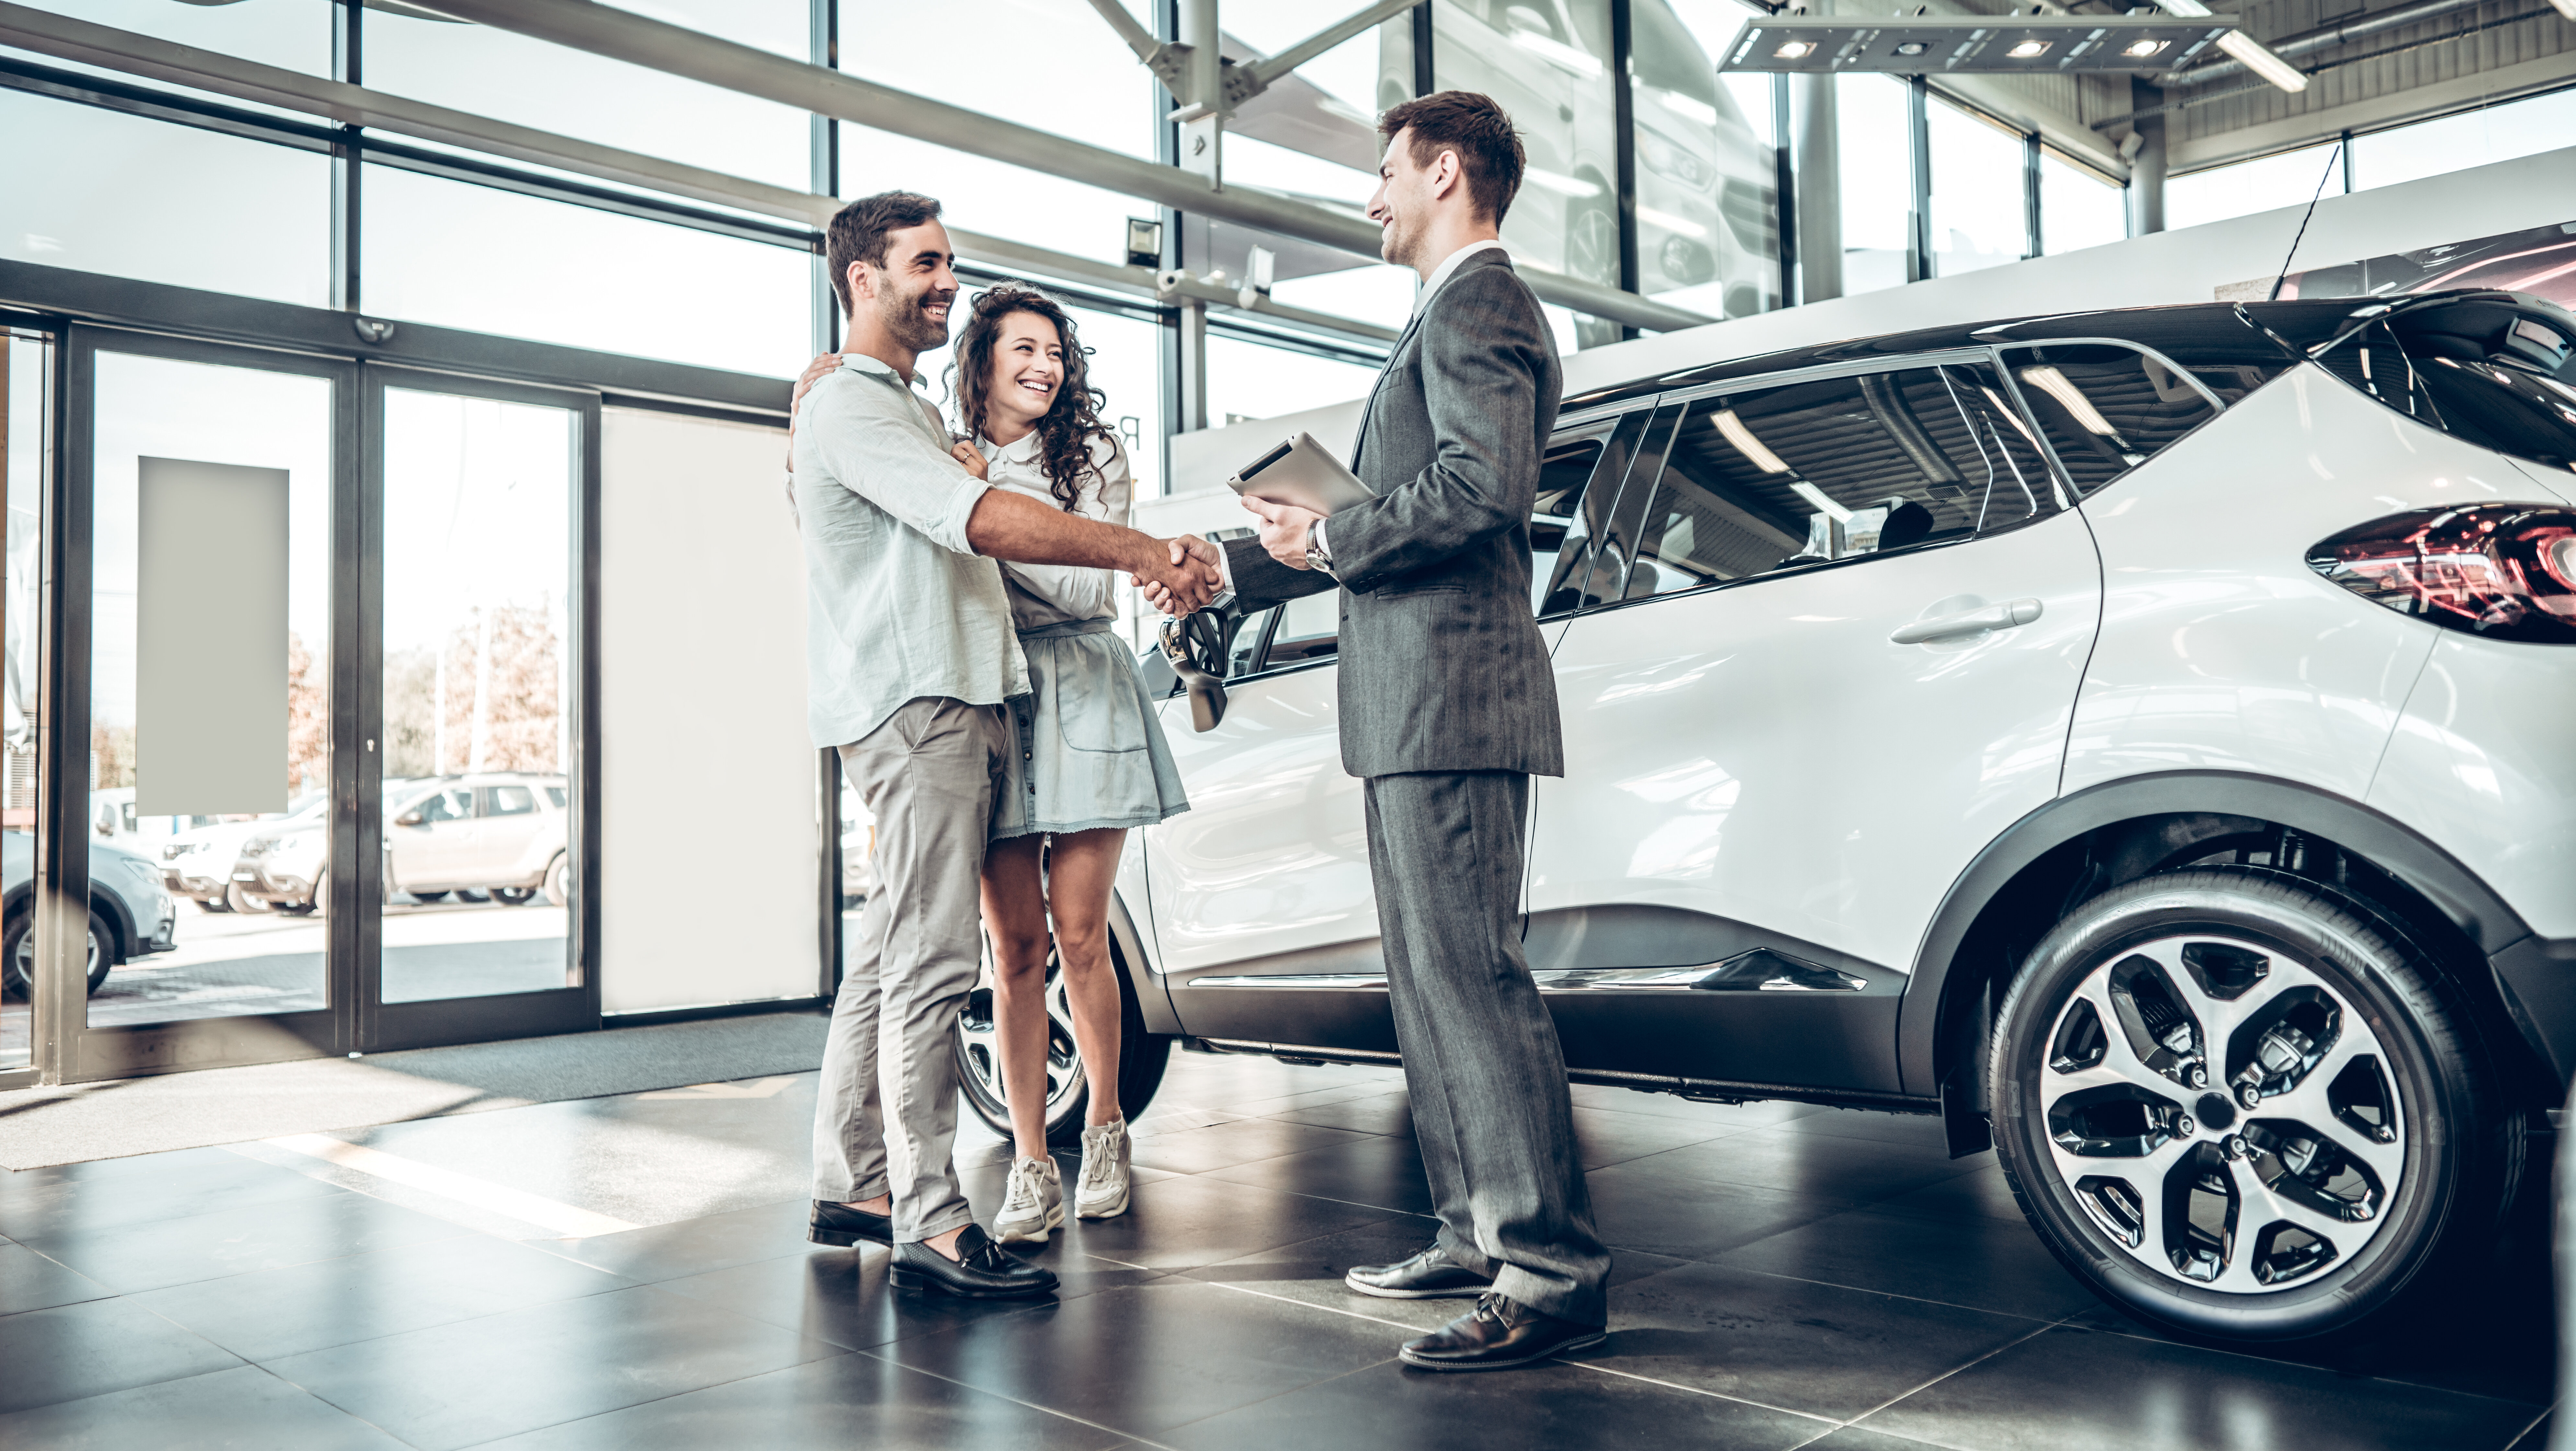 Young couple in a car dealership shaking hands with sales agent